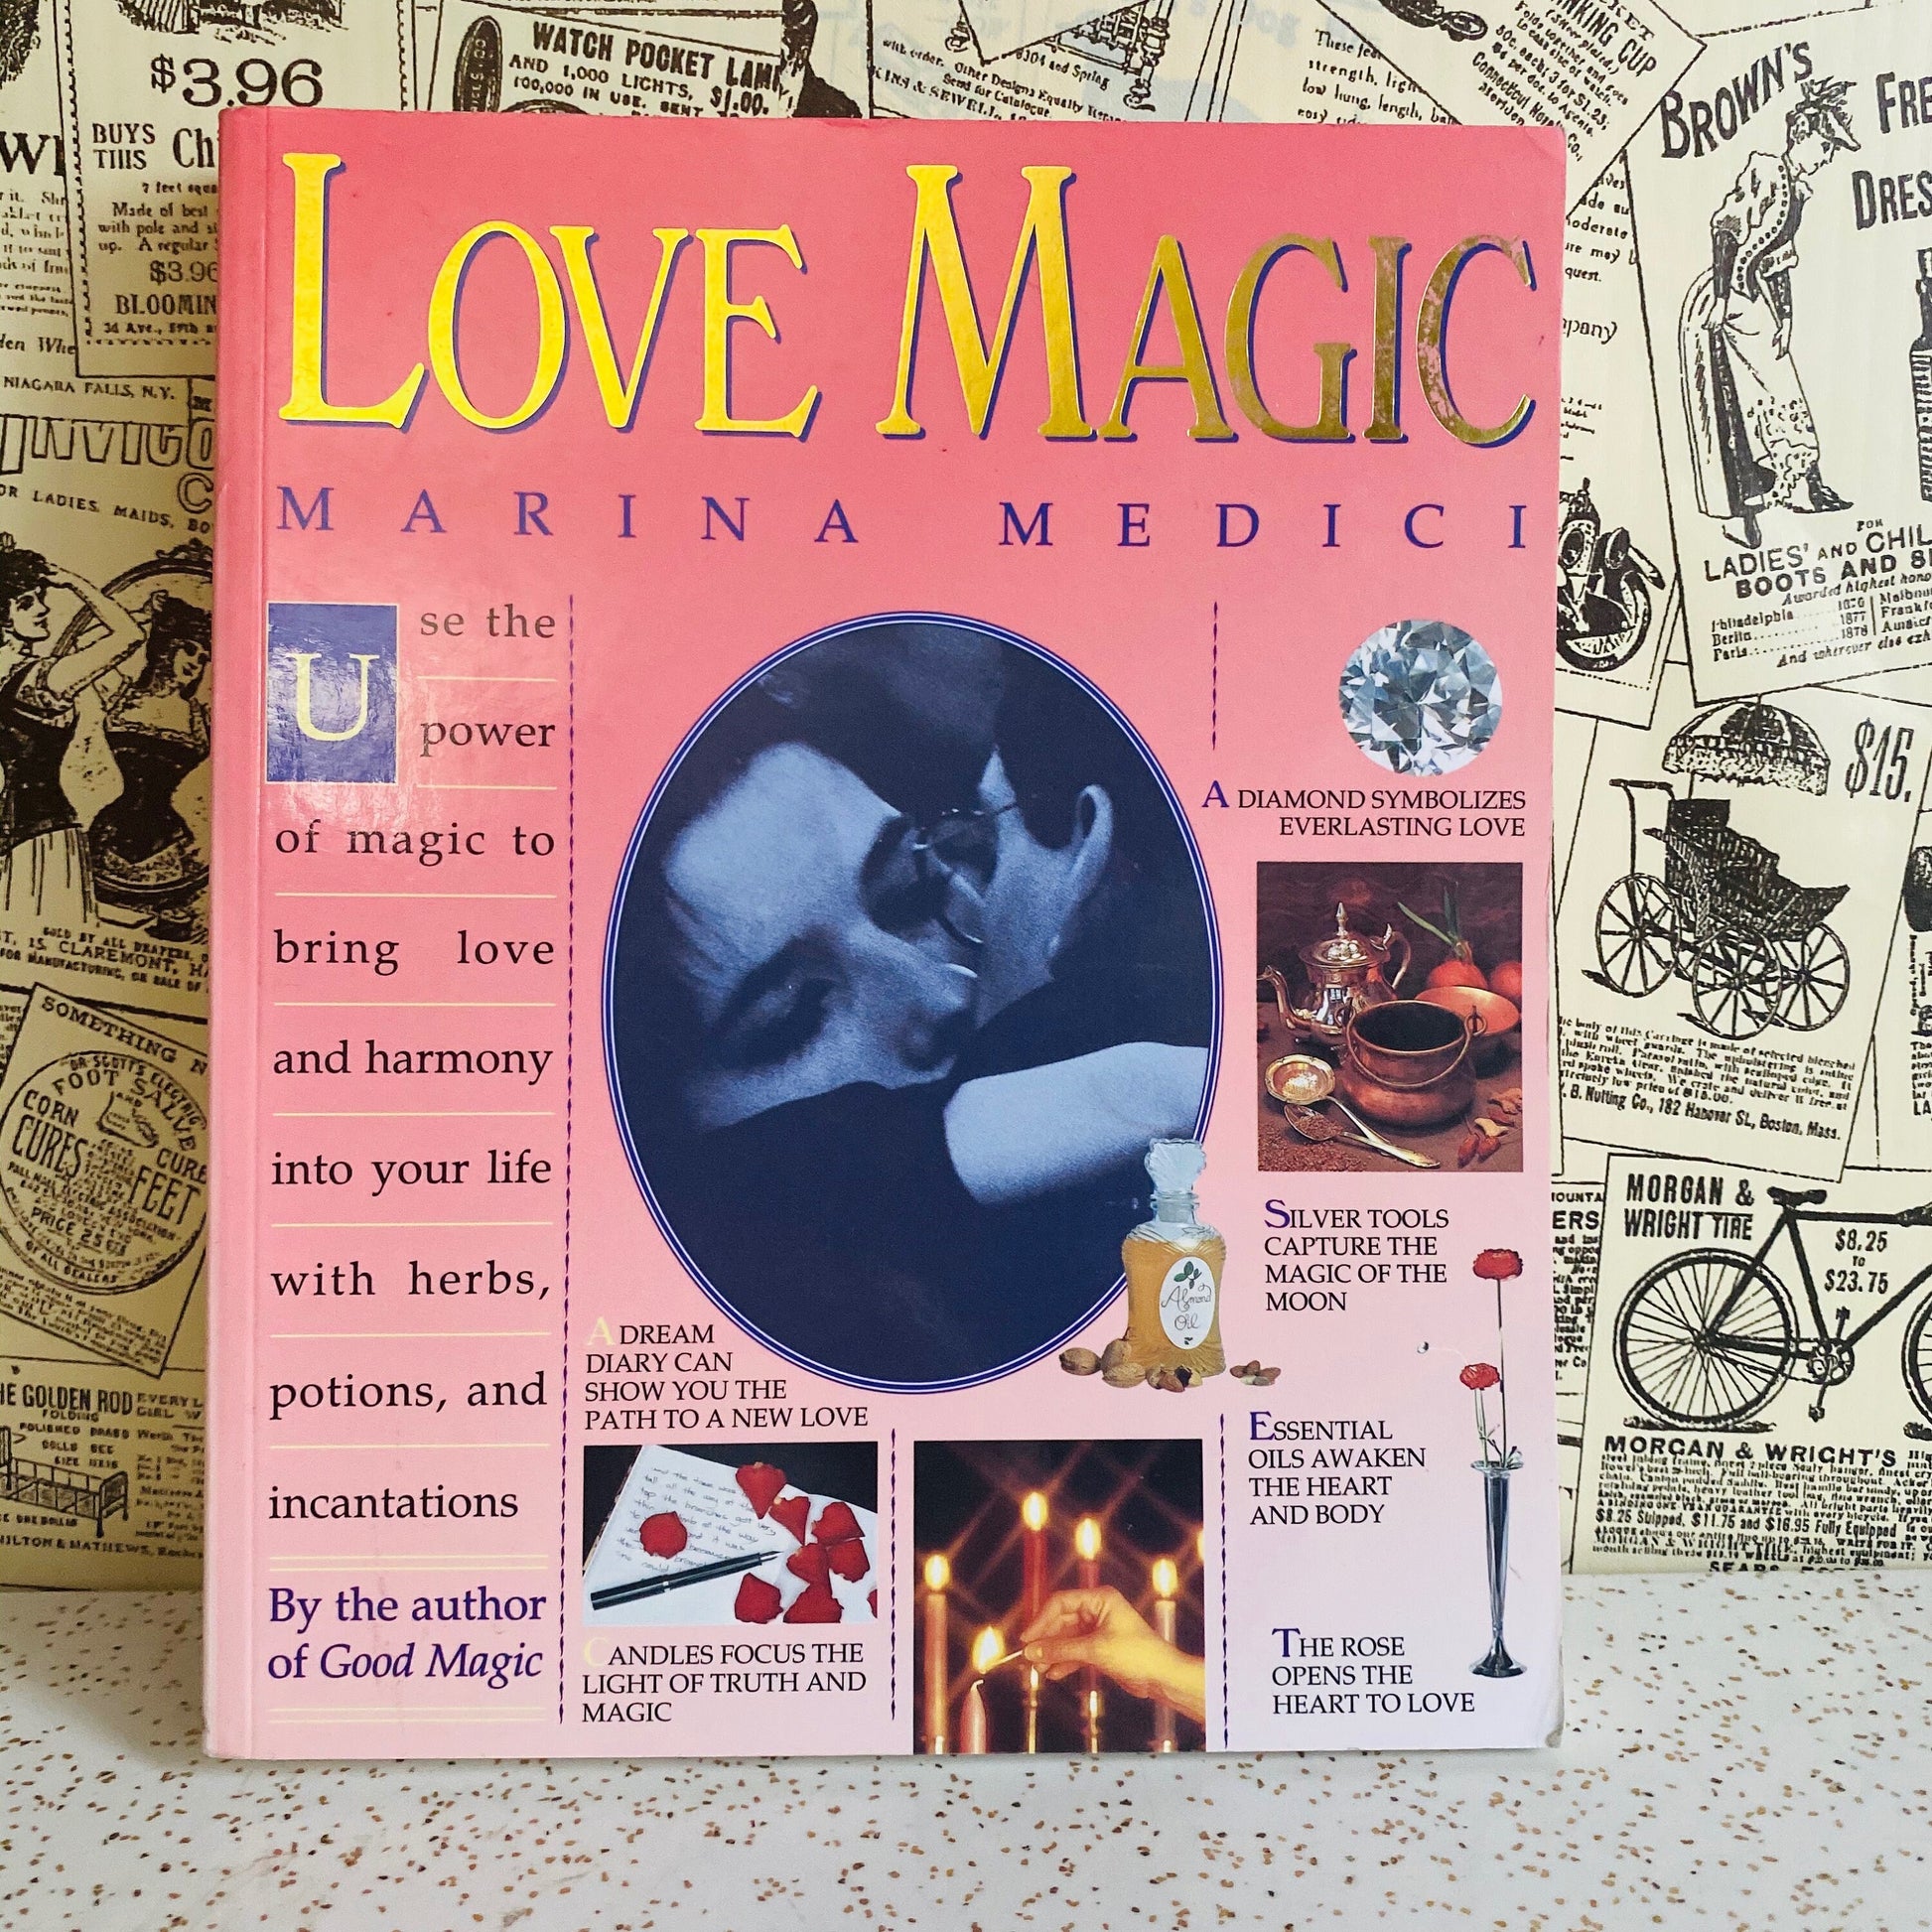 1994 Love Magic book by Marina Medici. Vintage love magic book with love spells, rituals. Great Valentine's Day gift for new witch or lover